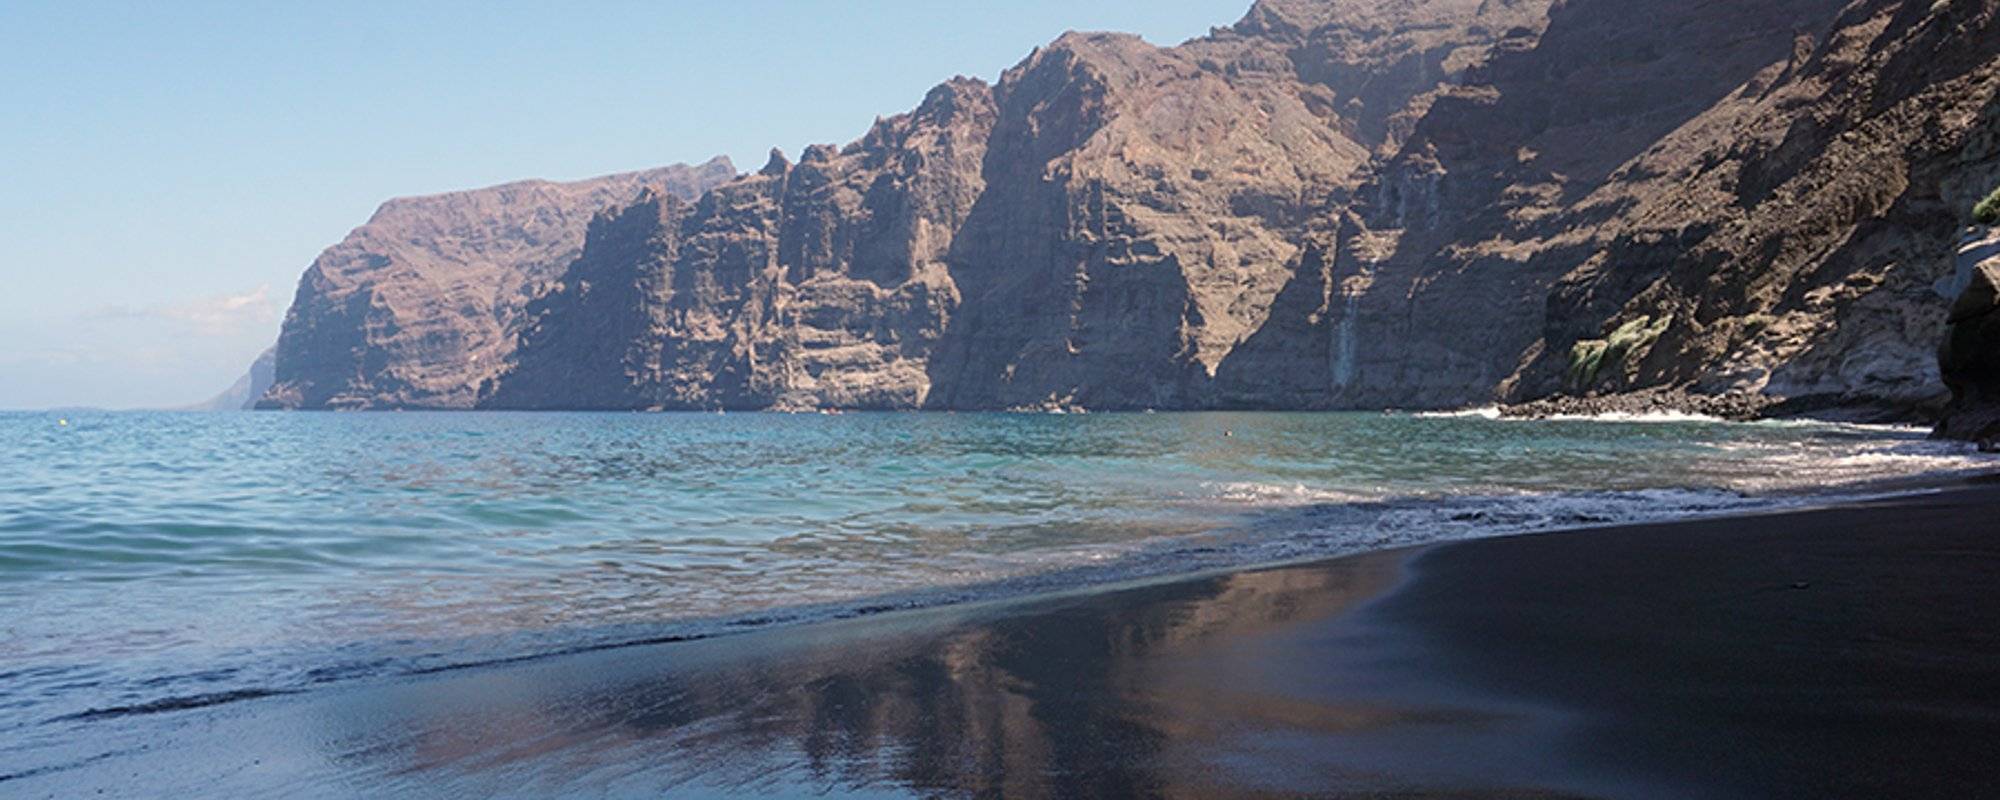 Tenerife's Southern Shores